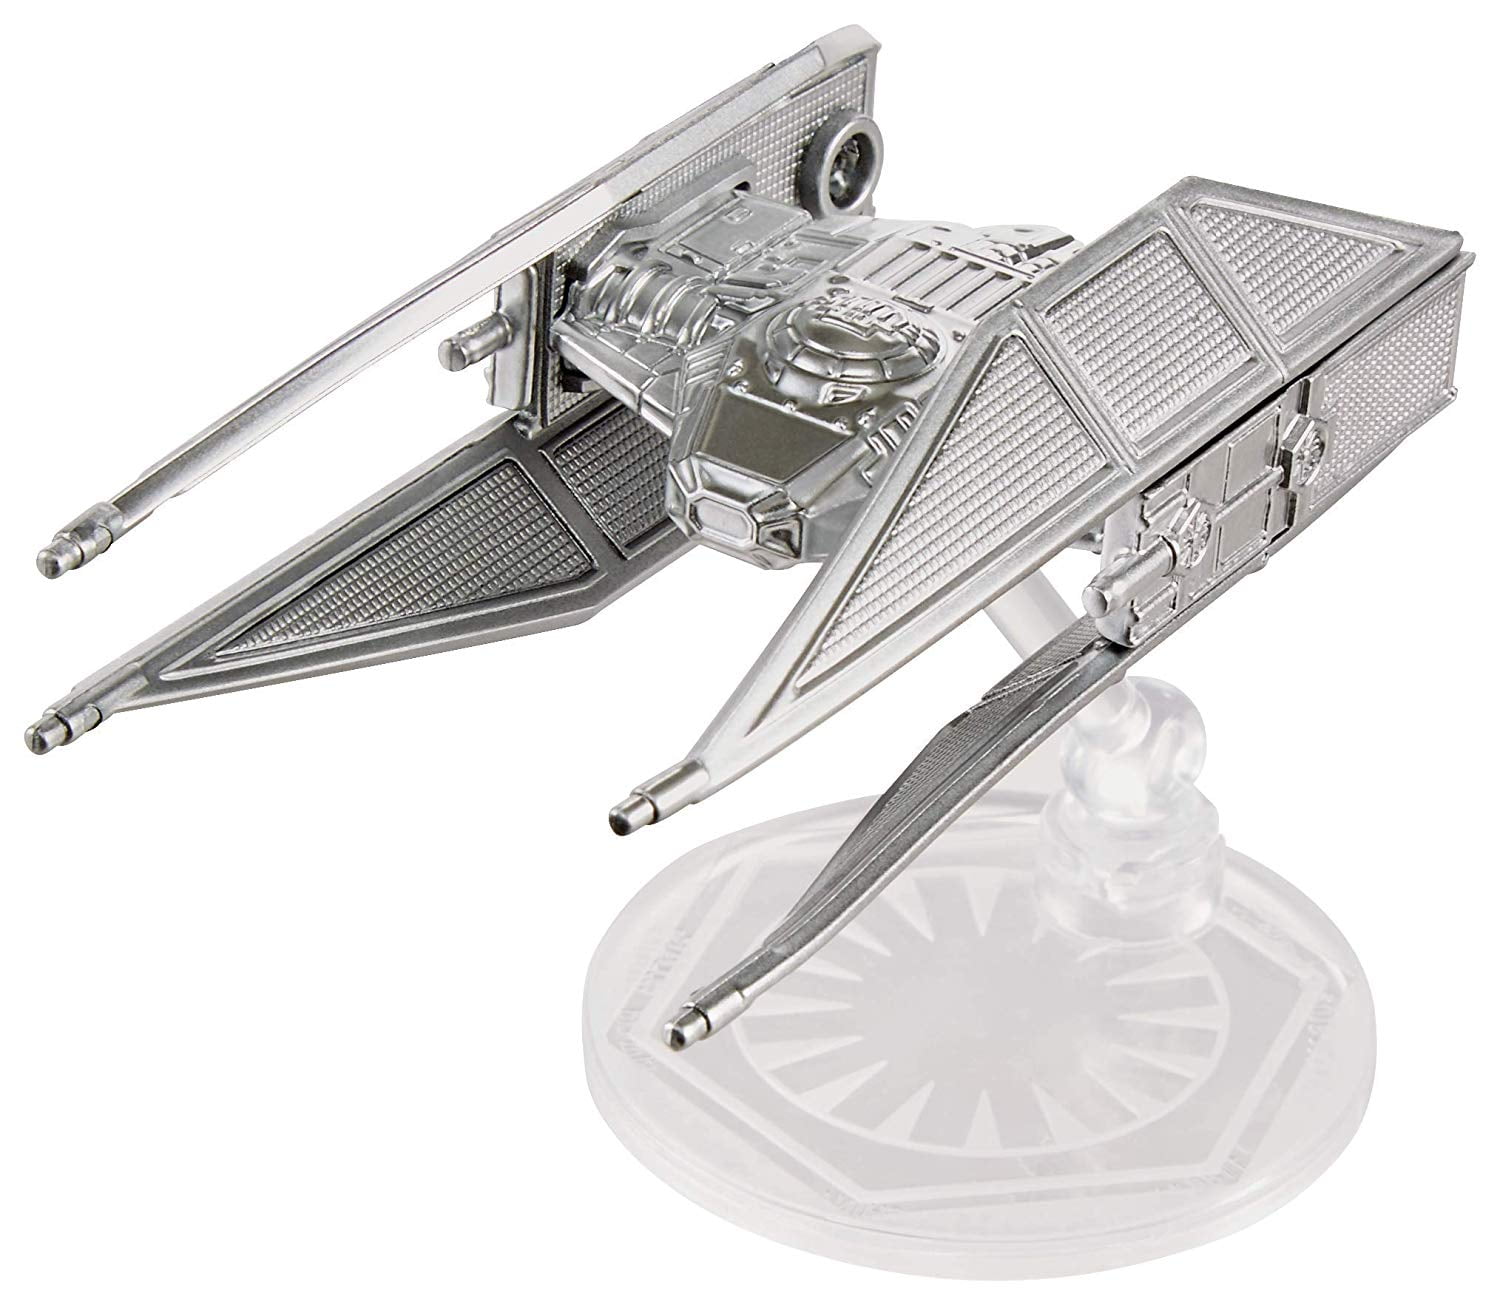 Hot Wheels Star Wars Starships Commemorative Series Tie Fighter 4 of 9 for sale online 